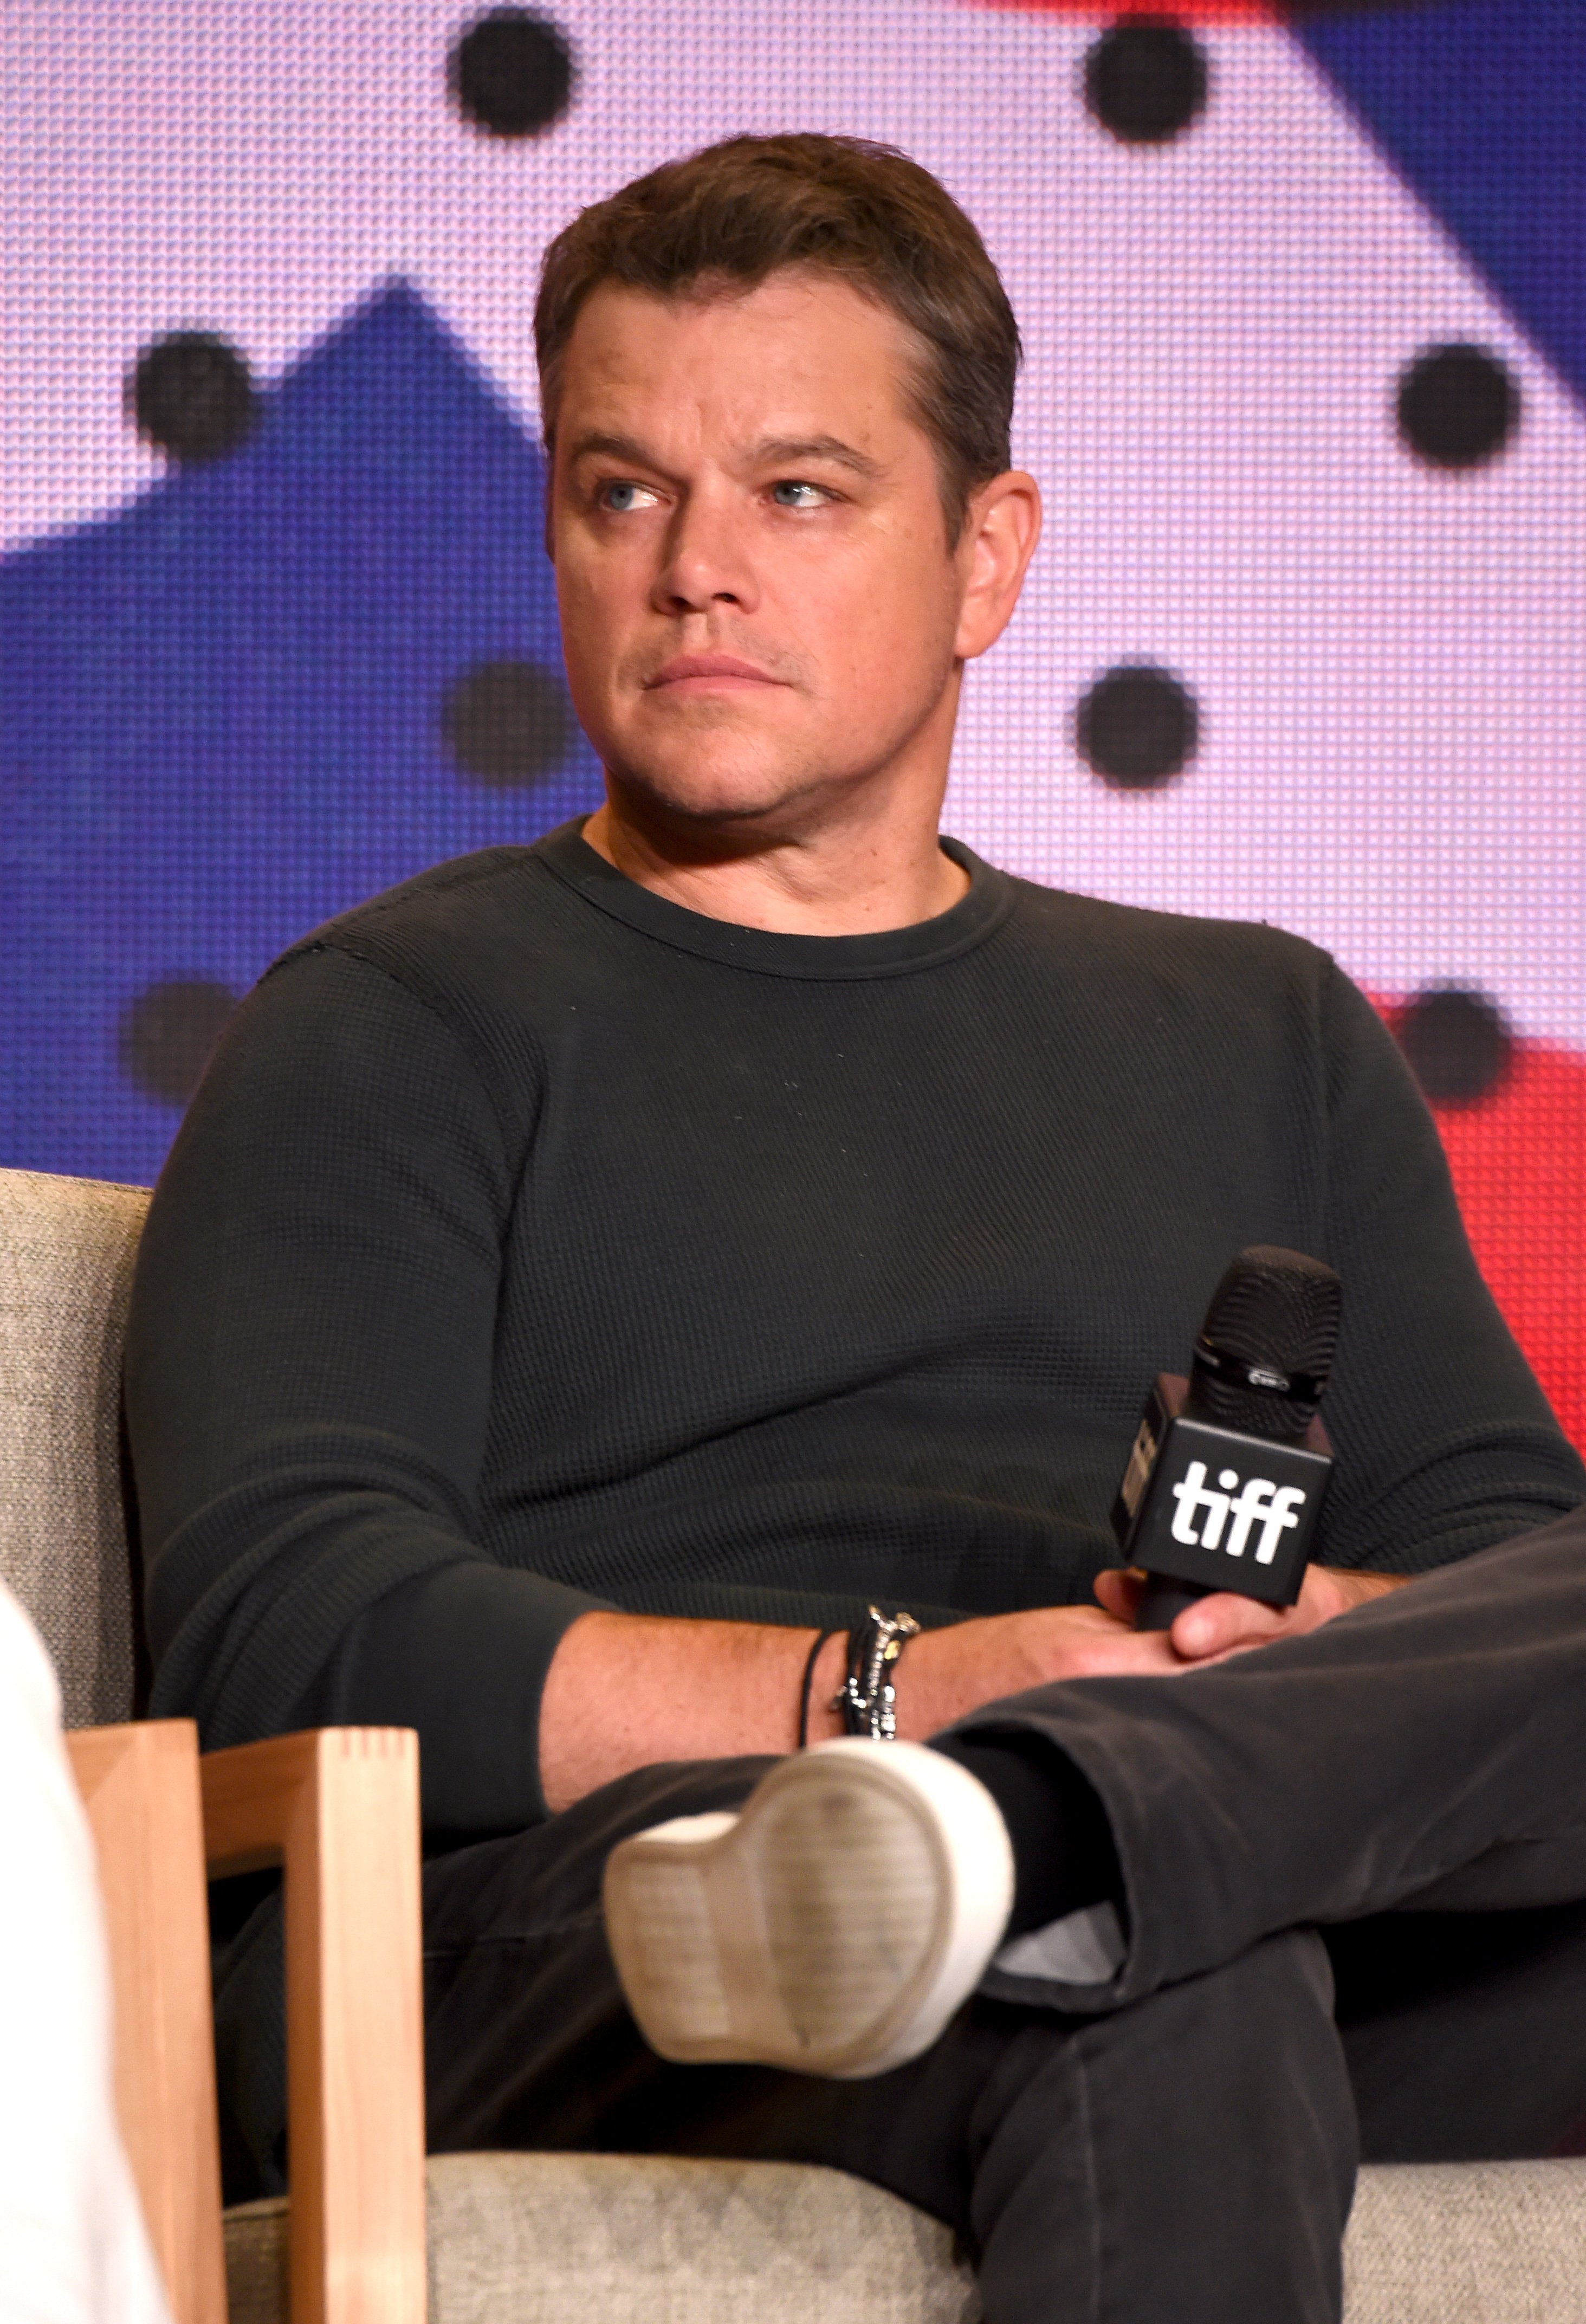  Matt Damon speaks onstage during the "Downsizing" press conference during the 2017 Toronto International Film Festival at TIFF Bell Lightbox on September 10, 2017 in Toronto, Canada | Source: Getty Images